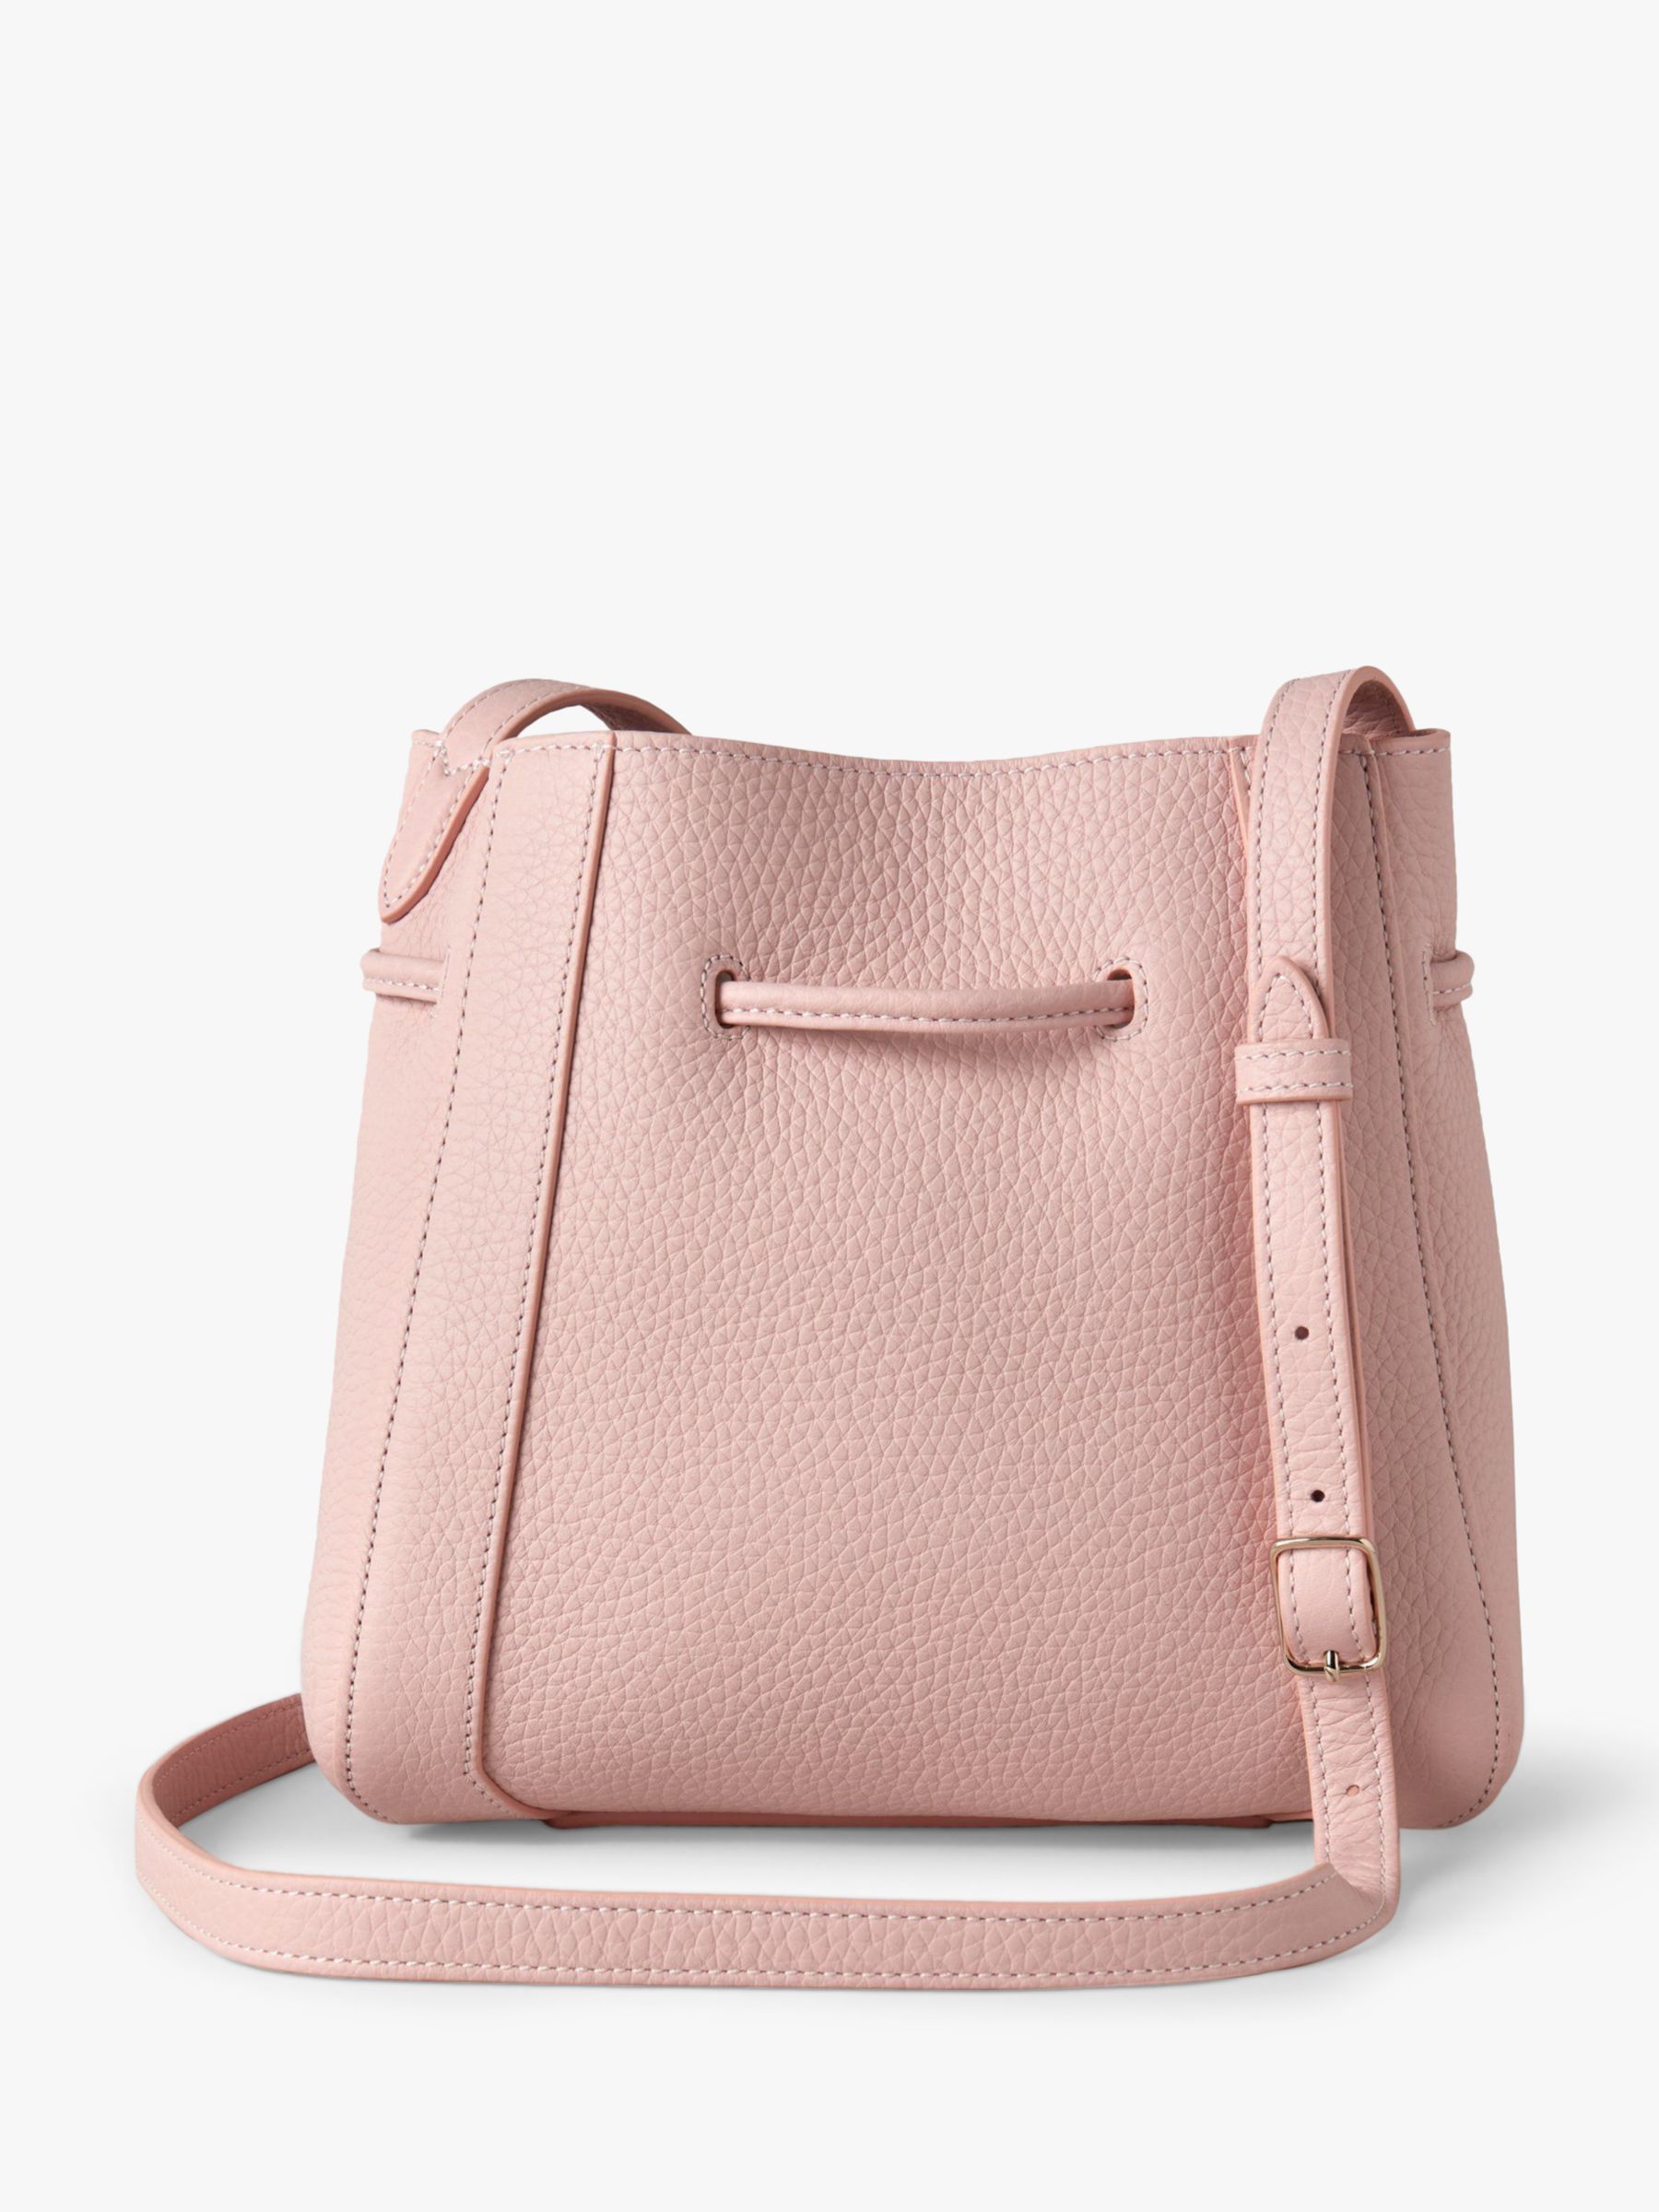 Mulberry Mini Millie Heavy Grain Leather Tote Bag, Icy Pink